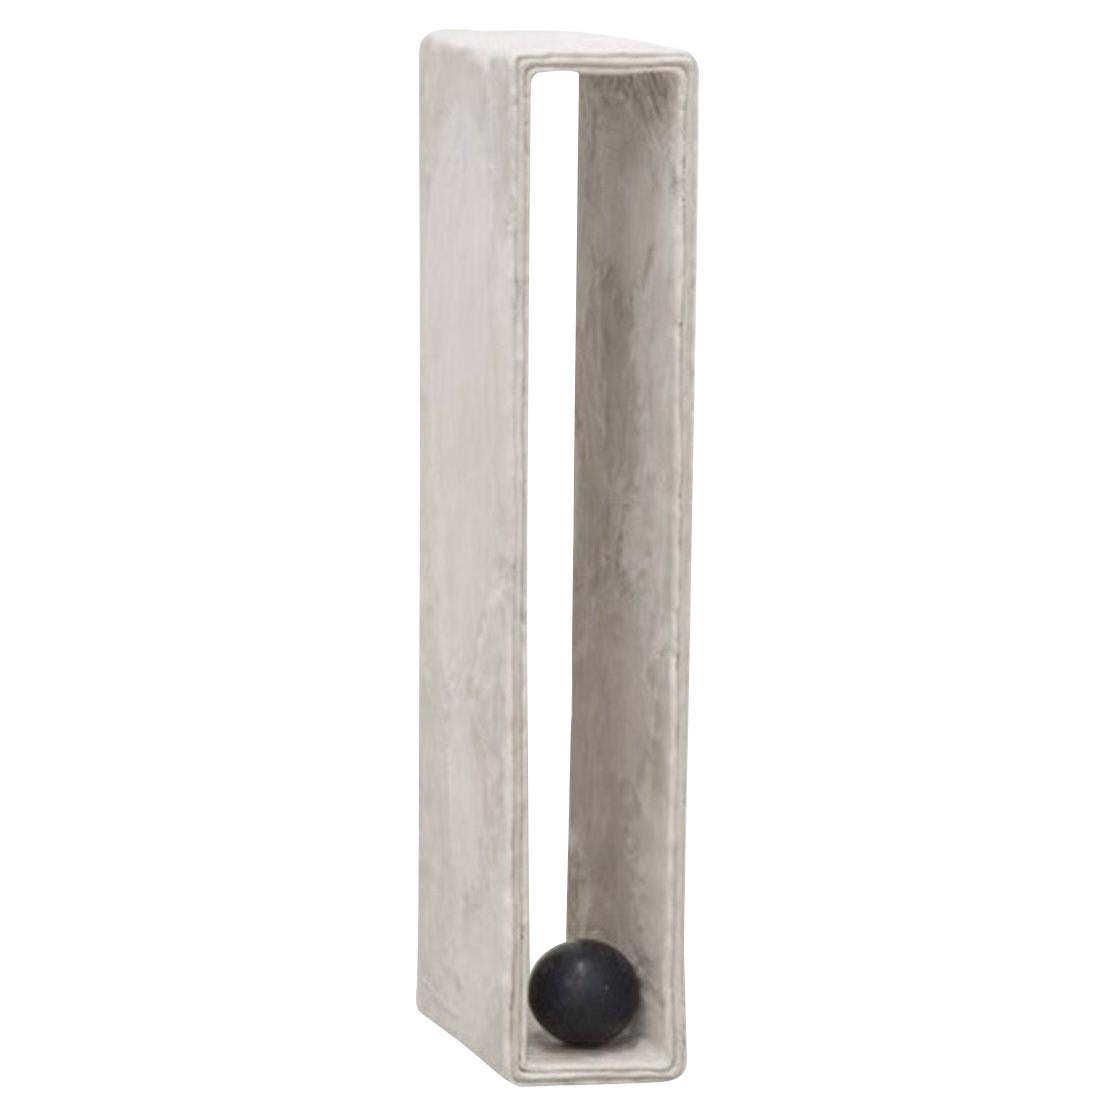 Plane Concrete Pedestal by Bailey Fontaine, REP by Tuleste Factory For Sale